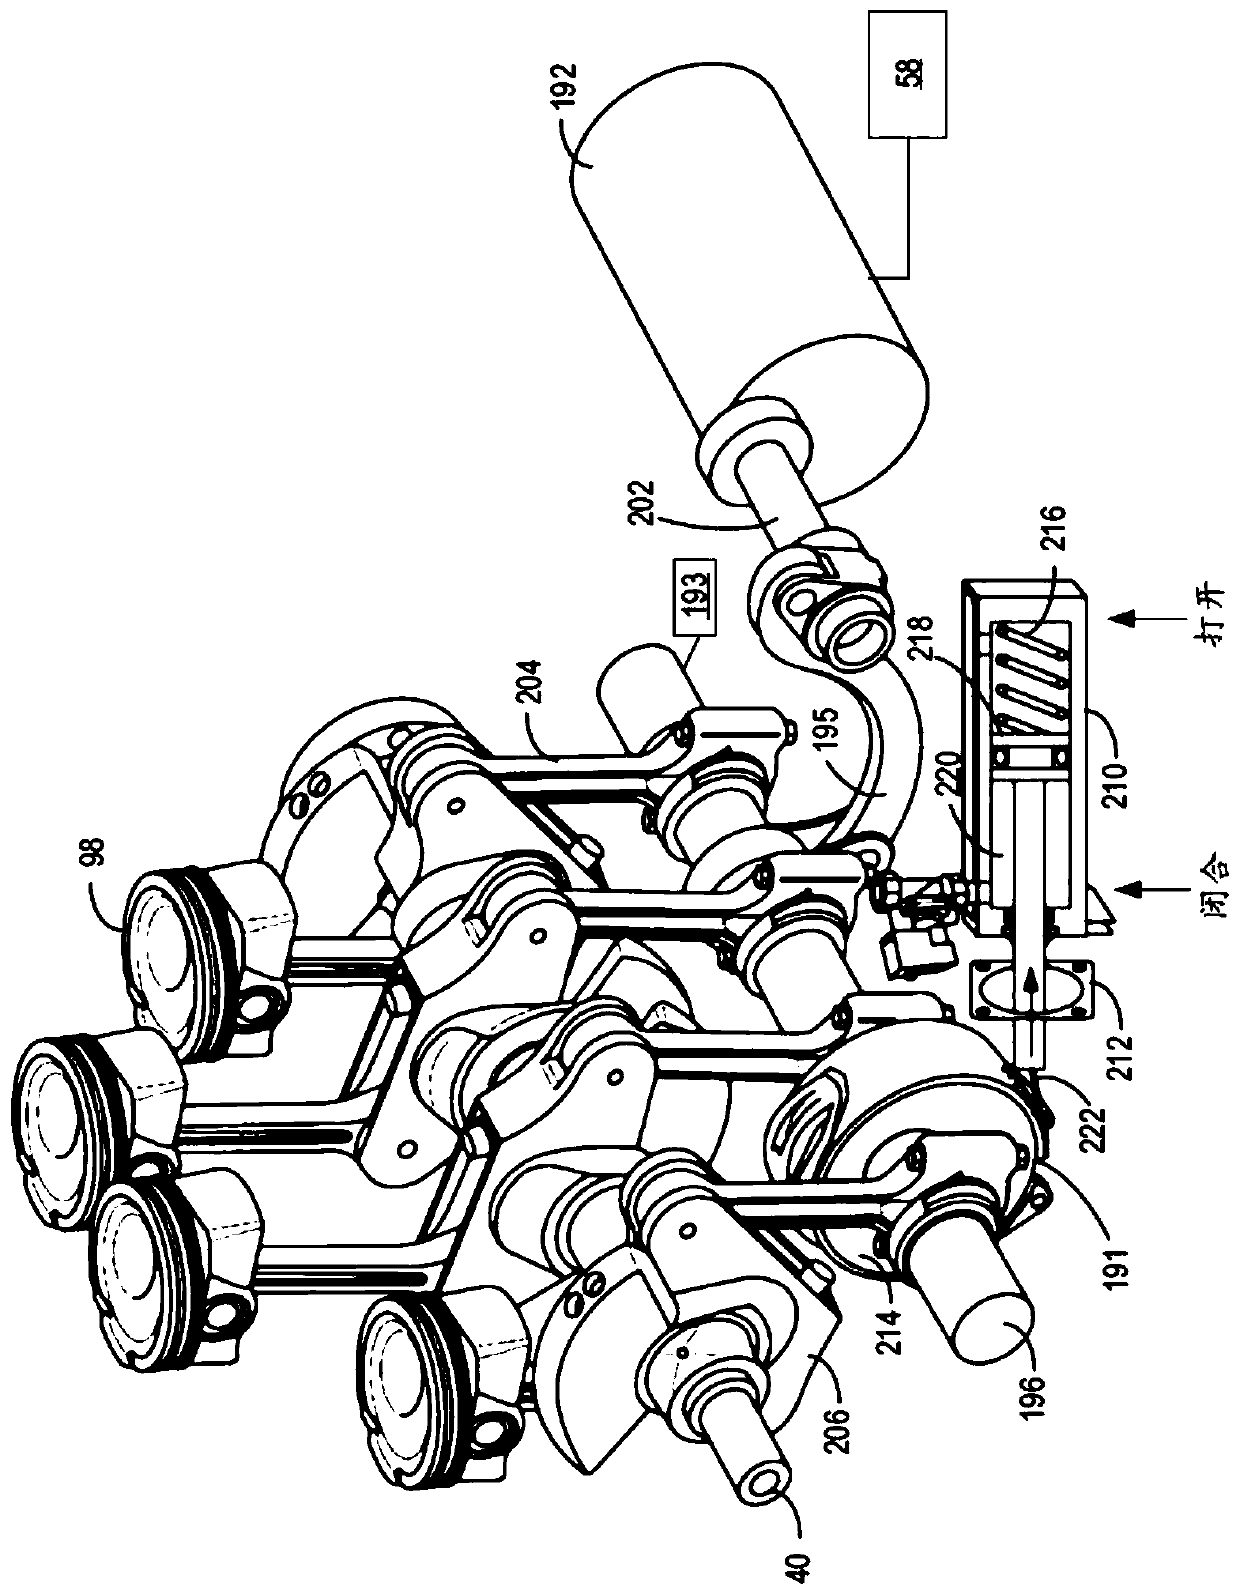 System and method for variable compression ratio engine